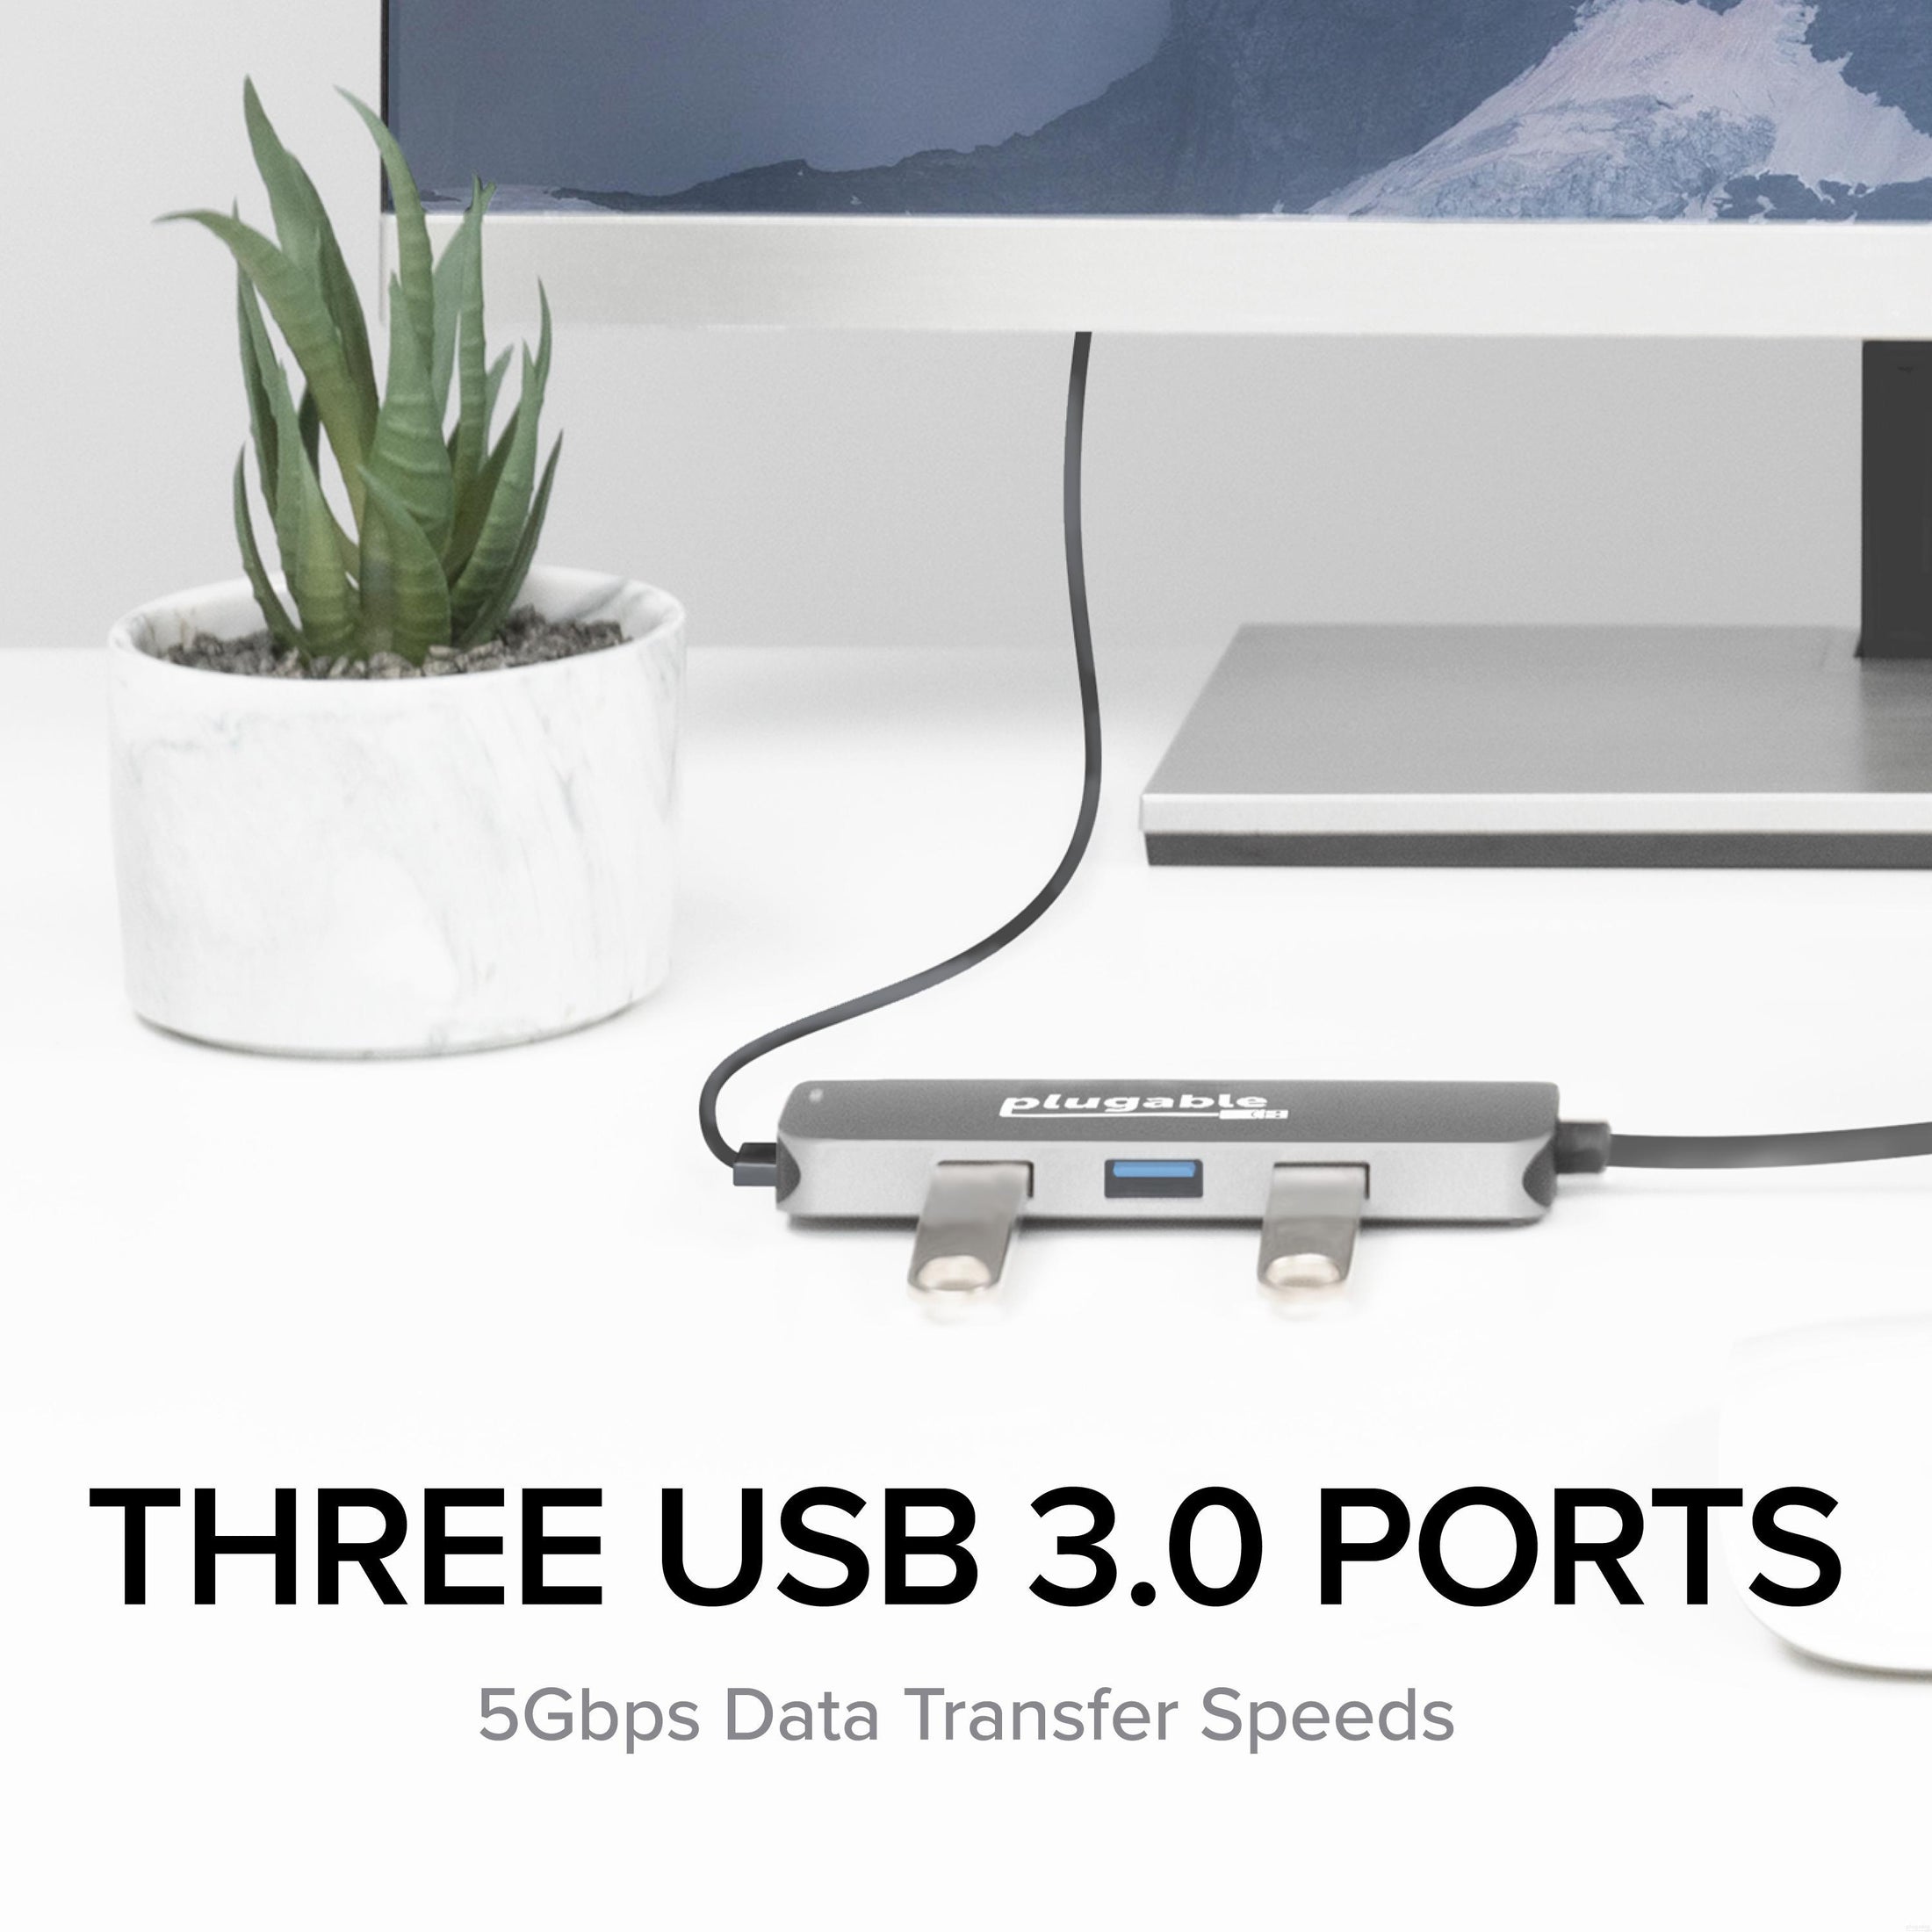 Plugable 7 in 1 USB C Hub Multiport Adapter w Ethernet Turns a Single Port  into a 7 in 1 USB C Hub Compatible with Mac Windows Chromebook Dell XPS and  Thunderbolt